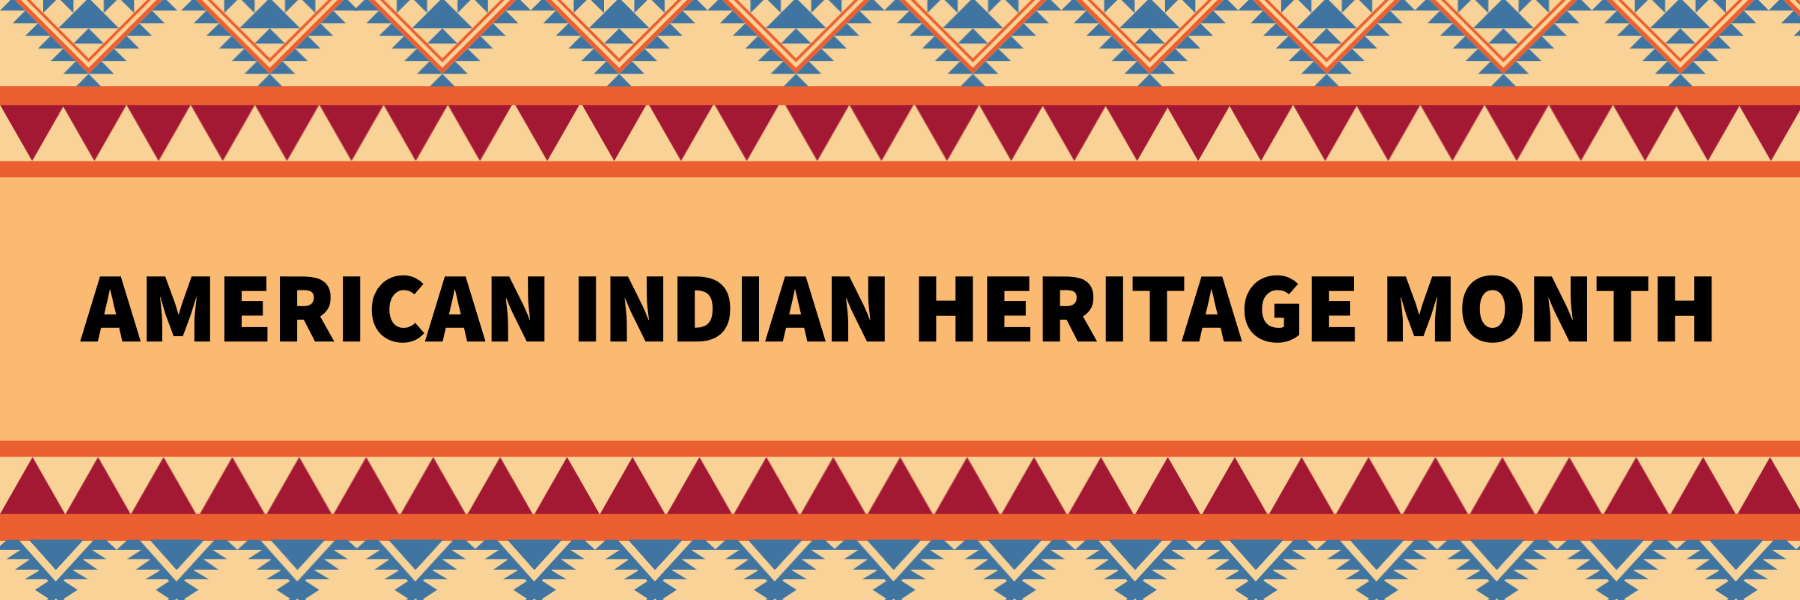 American Indian Heritage Month. Blue orange and red pattern adorn the top and bottom of the graphic with text in the middle.